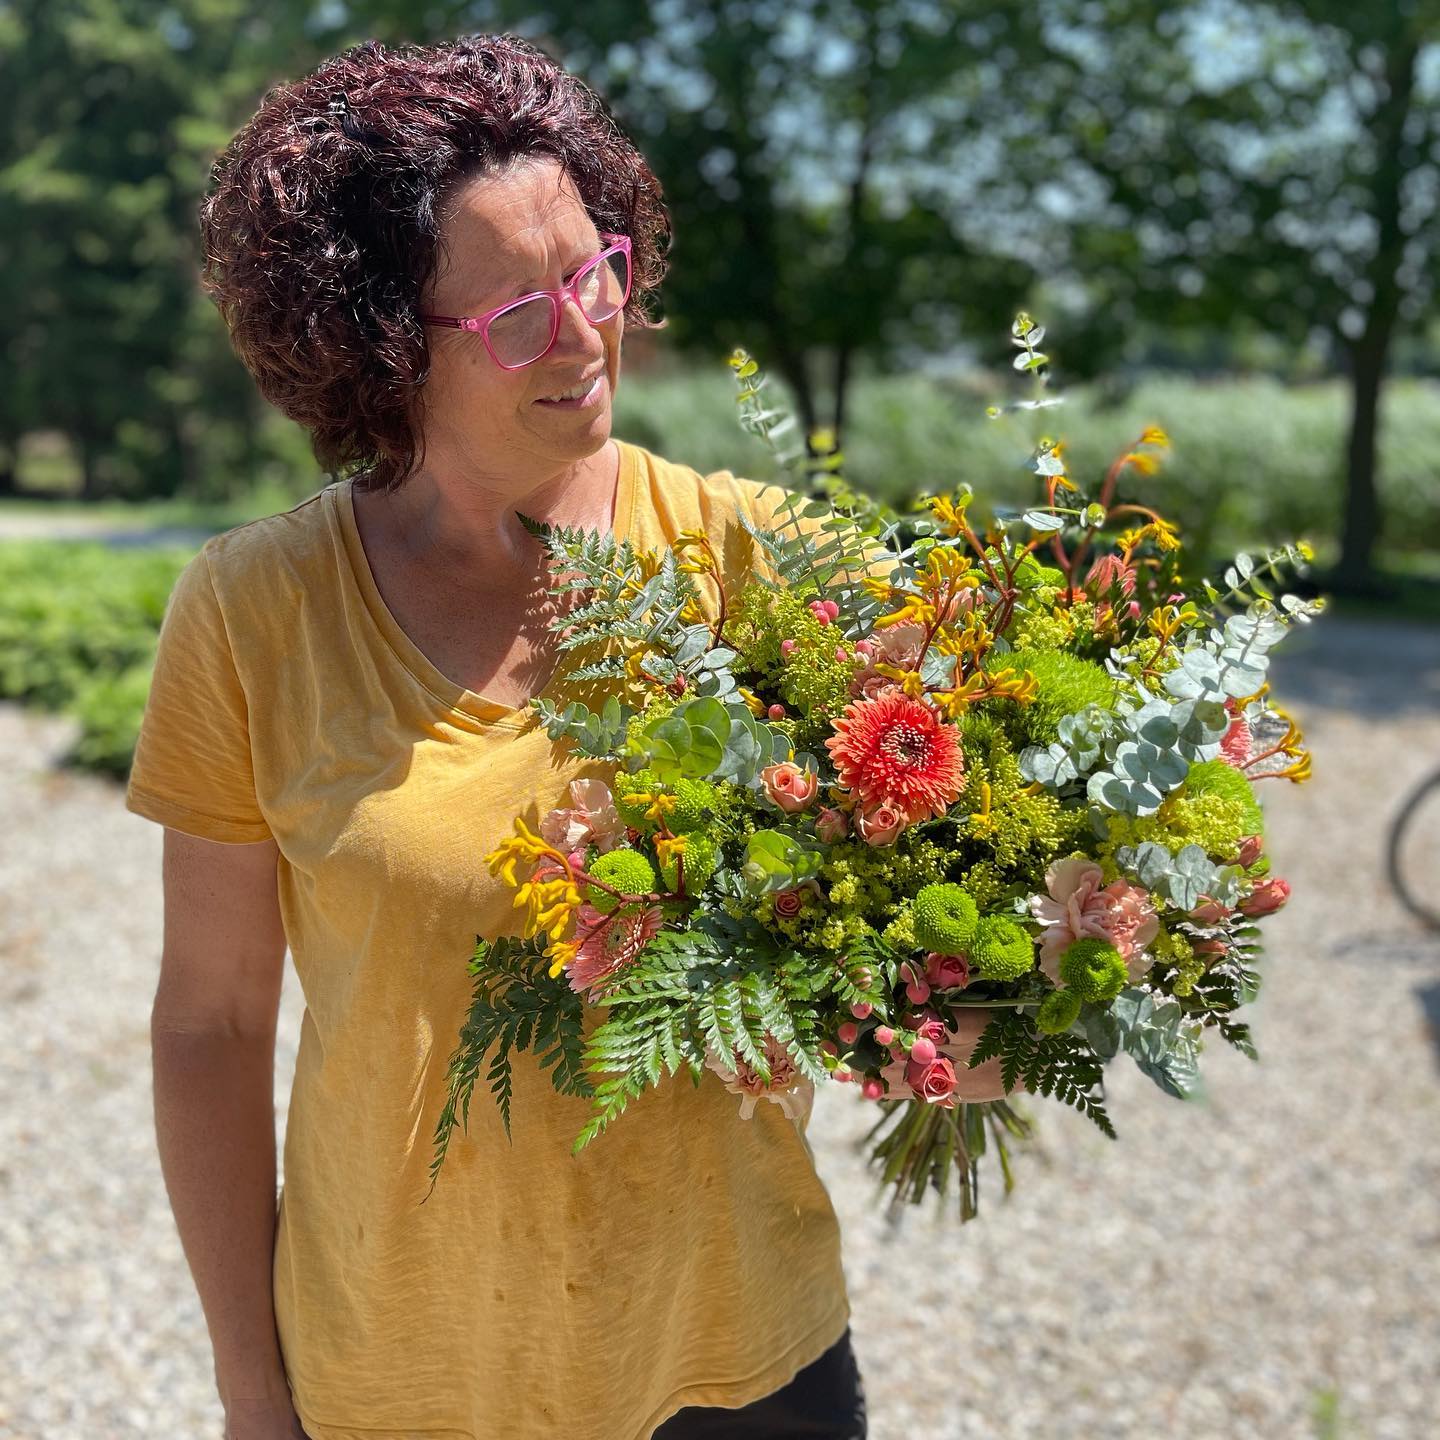 Ieneke from Rombouts Pottery and Flowers holding a bouquet